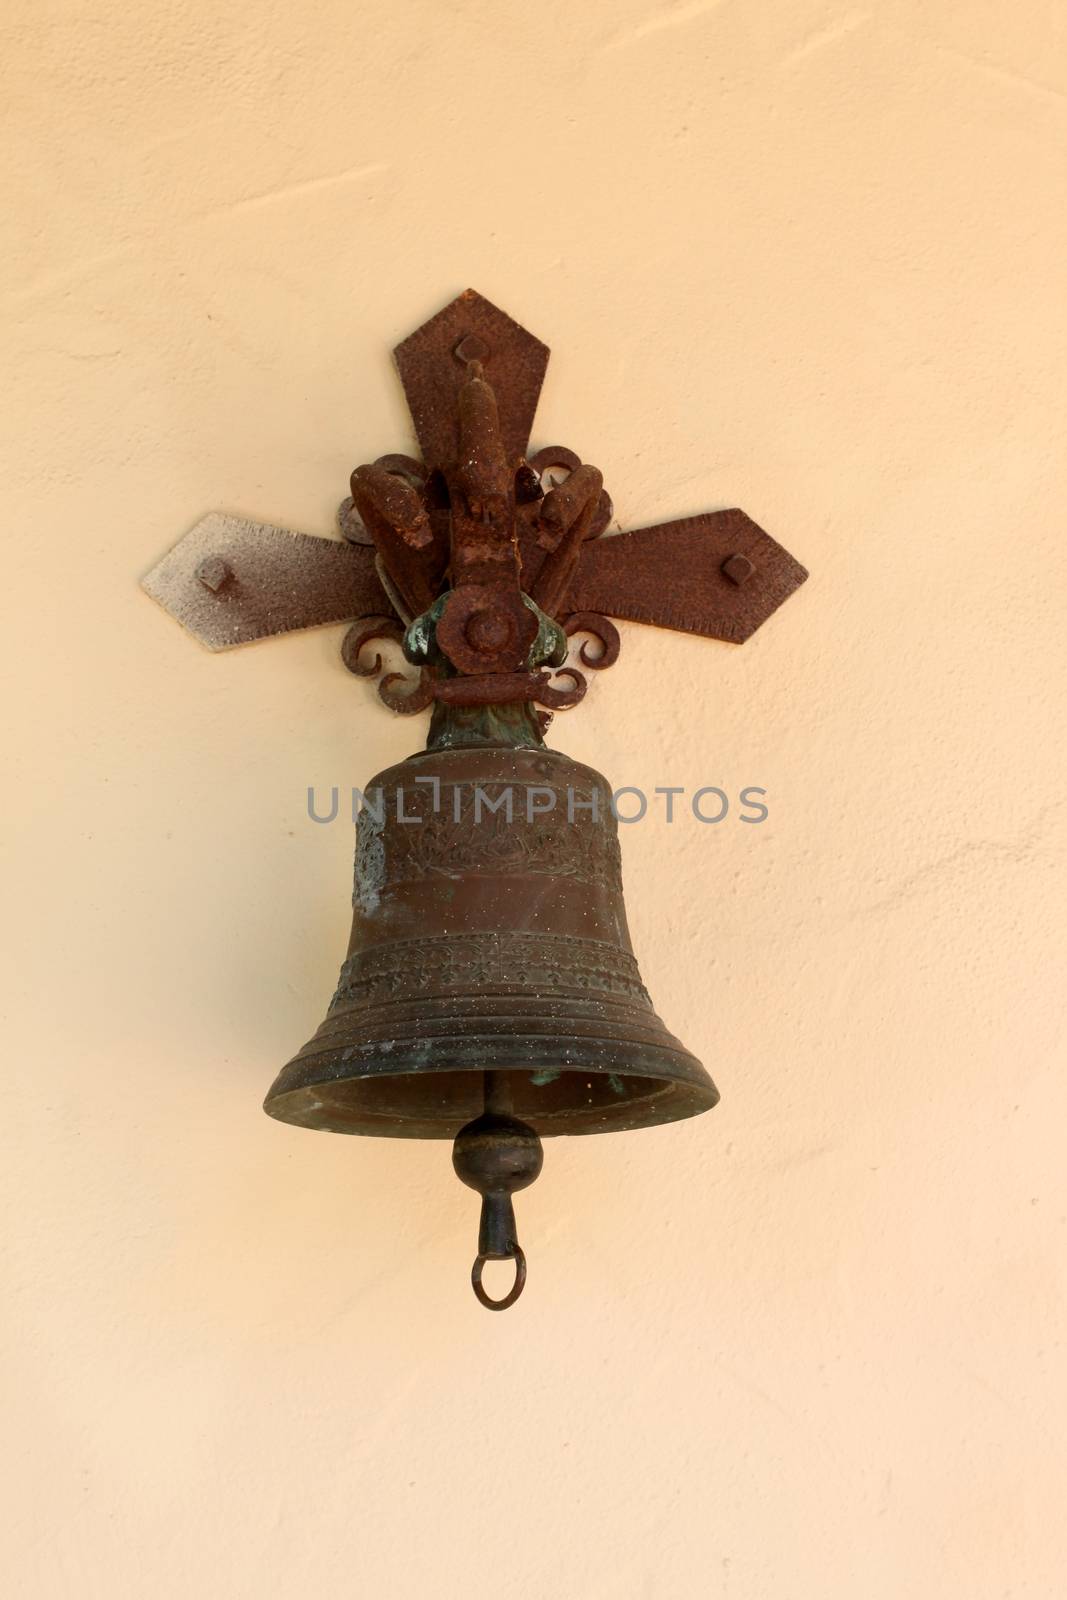 A rusty bell at the Mission Santa Ines.